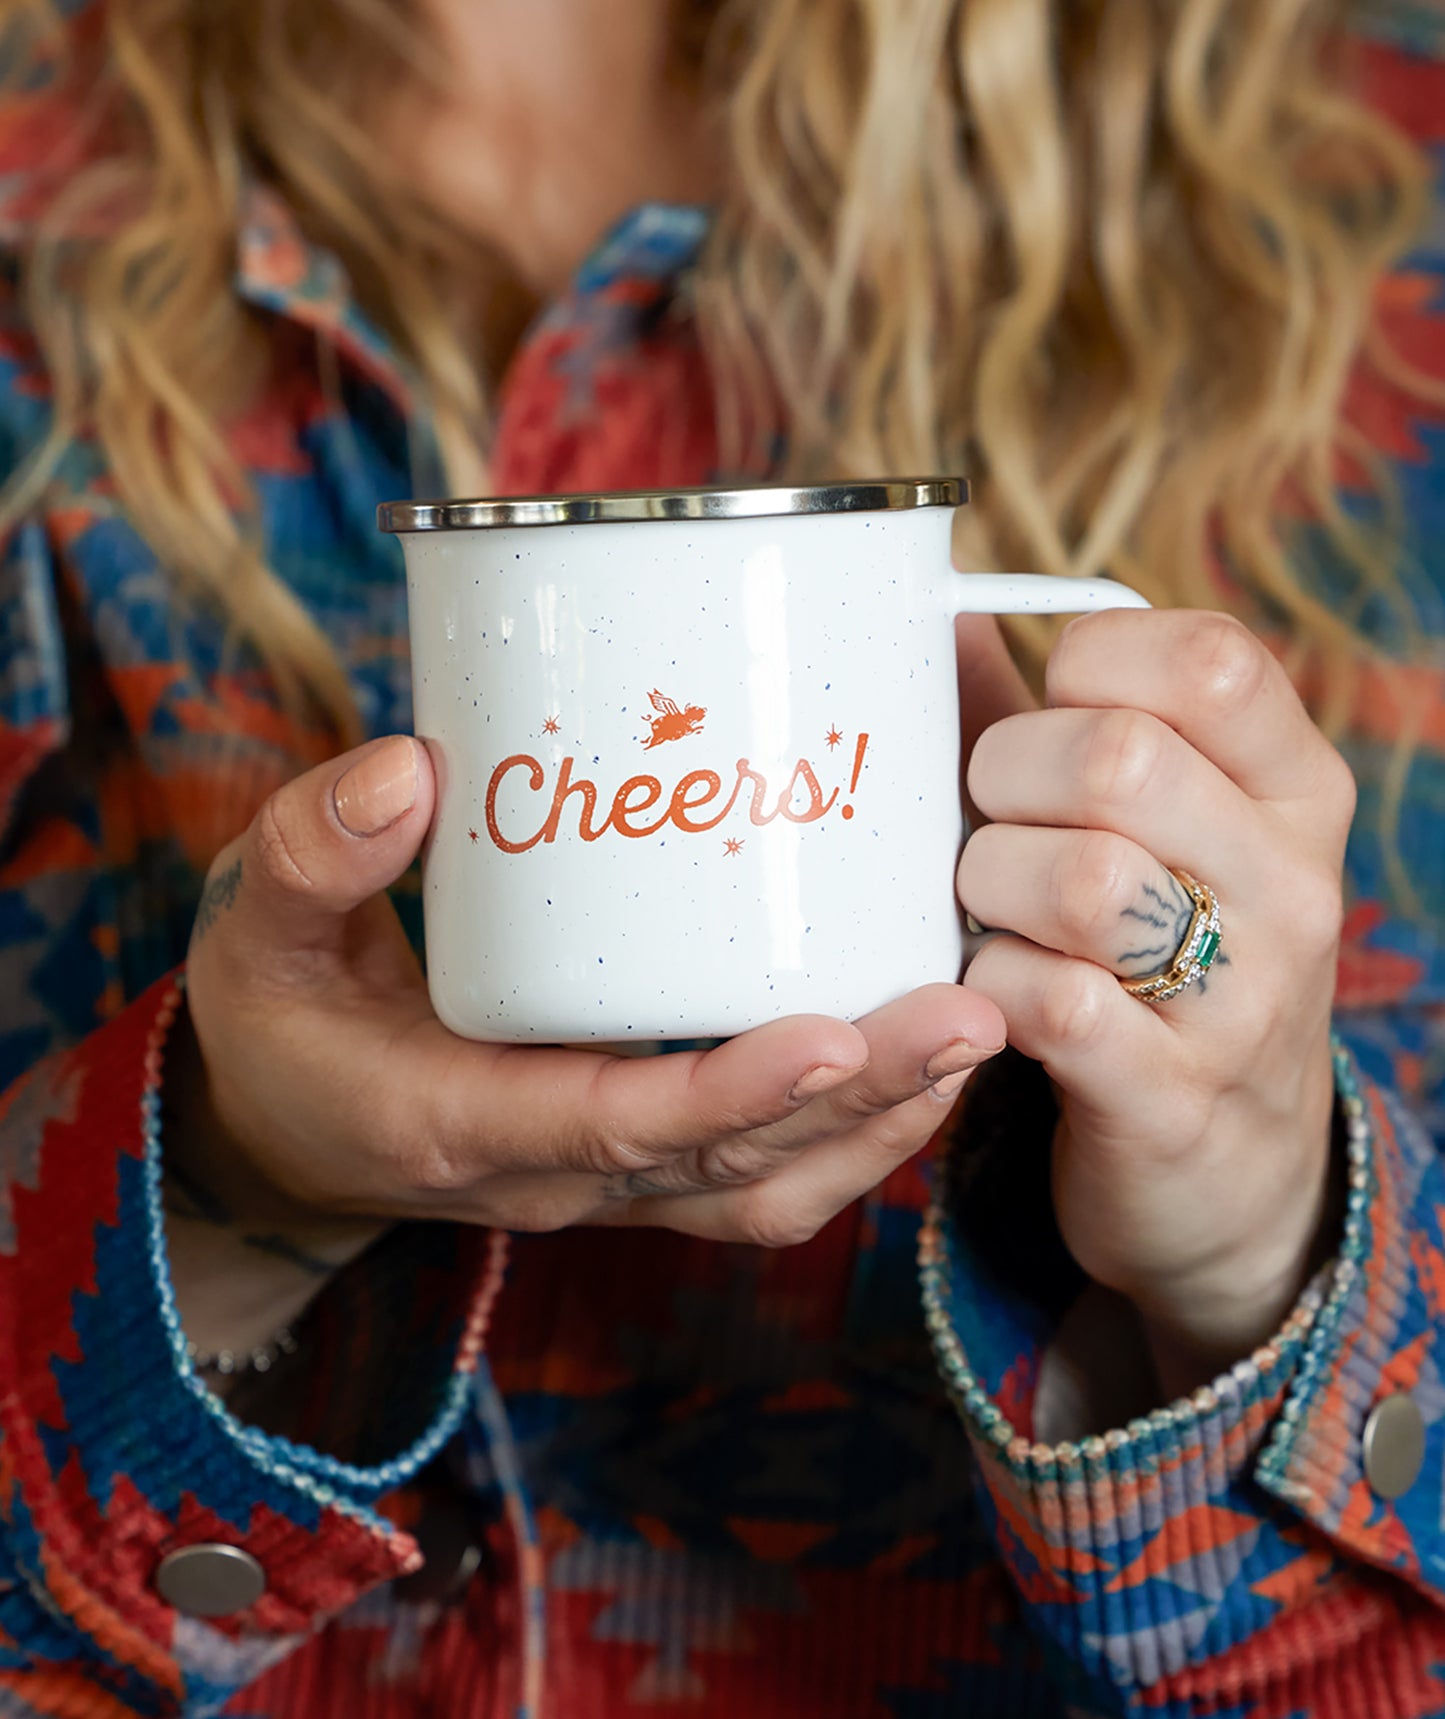 Lucille's "Cheers" Campfire Mug